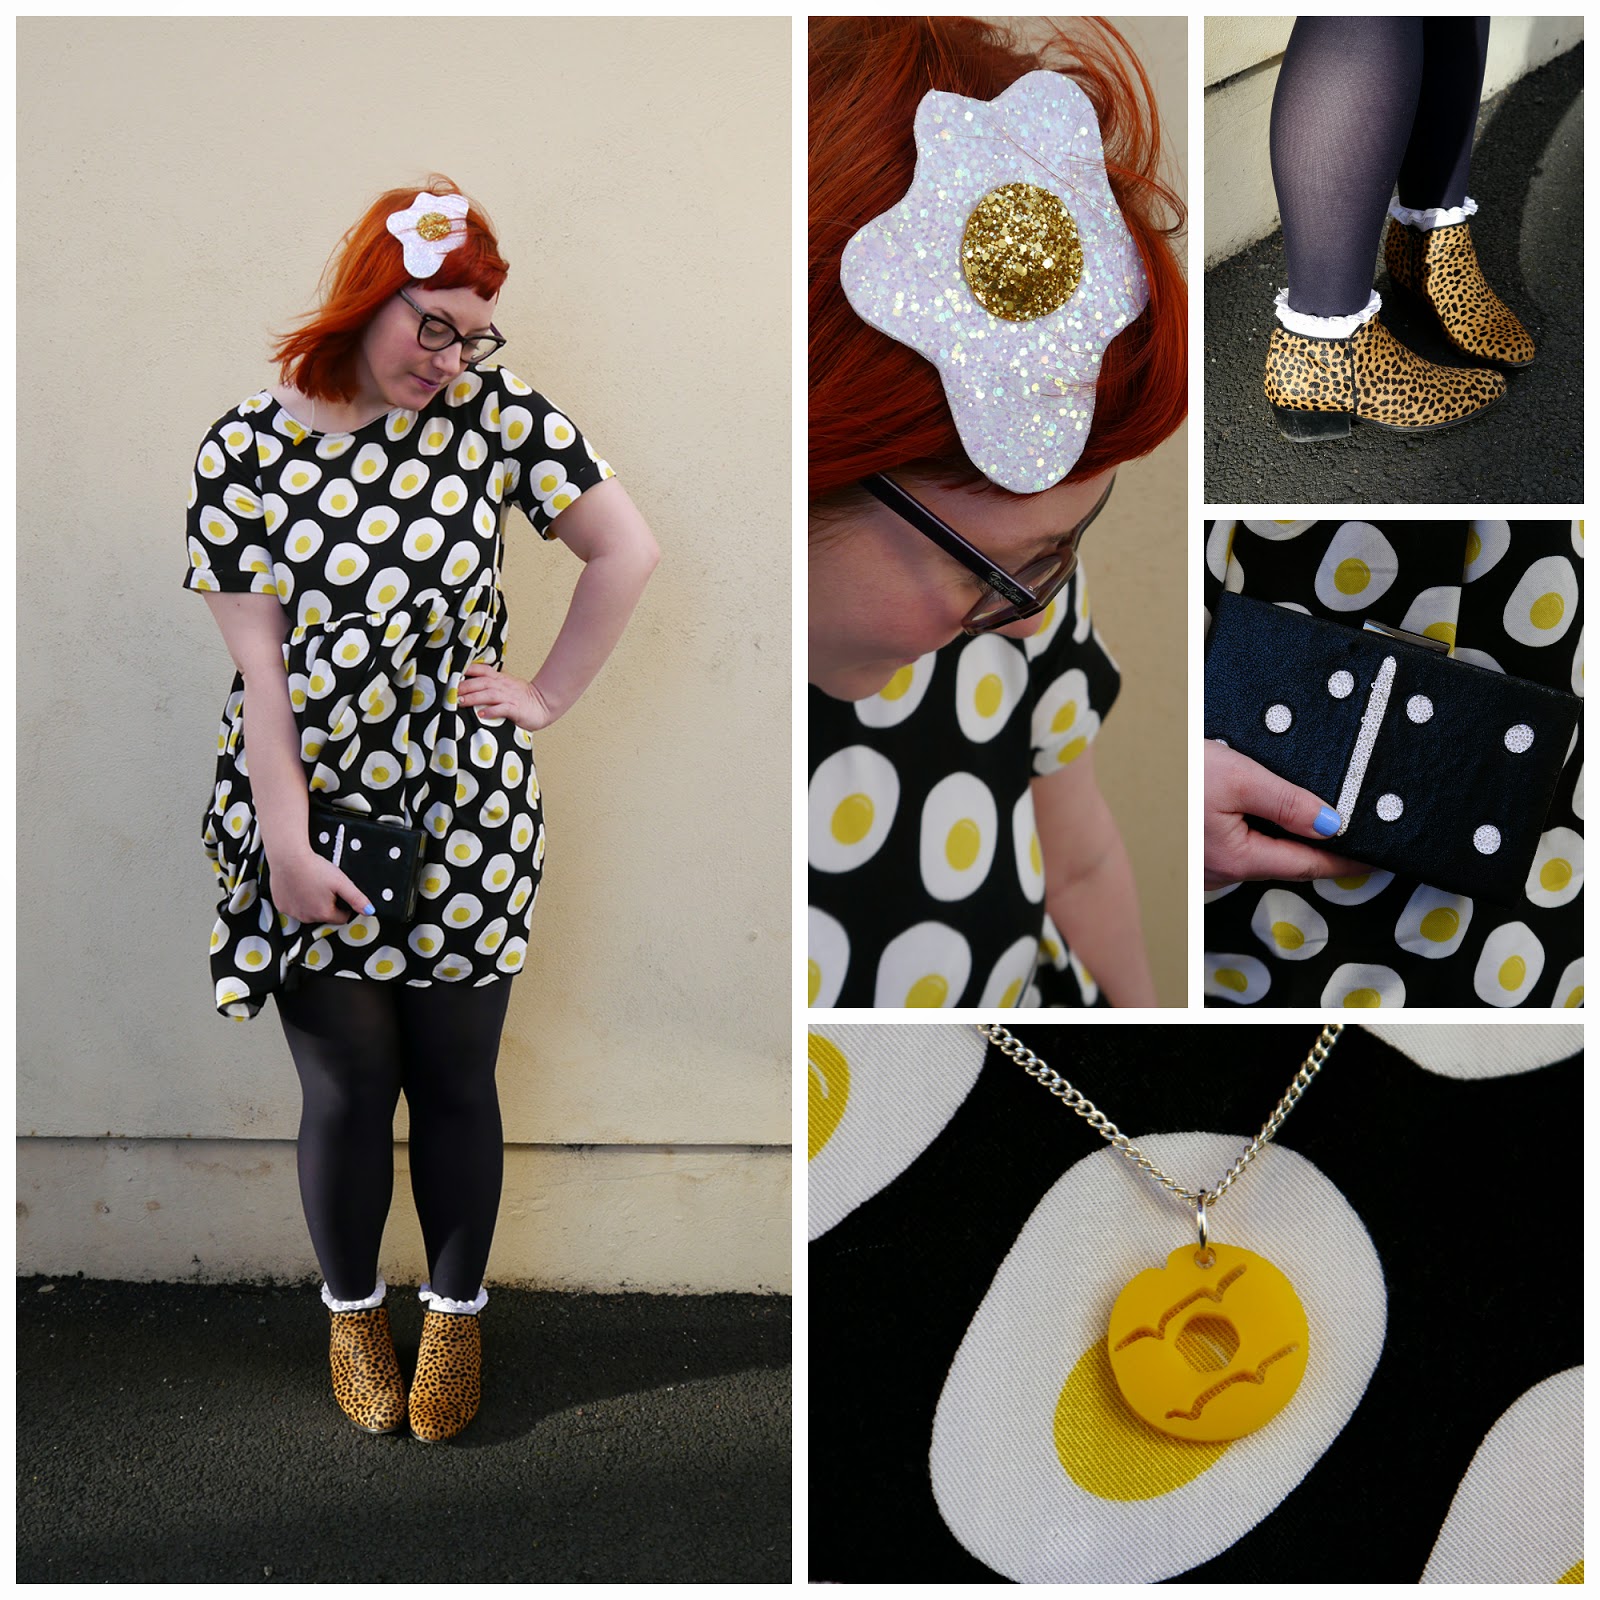 Egg themed outfit, food outfit, food style, The Whitepepper egg dress, Luna on the Moon glitter egg brooch hair clip, Nikki McWilliams party ring necklace, Duo leopard print ankle boots, frilly socks, birthday outfit, scottish blogger, Next domino clutch bag, red head, ginger blogger